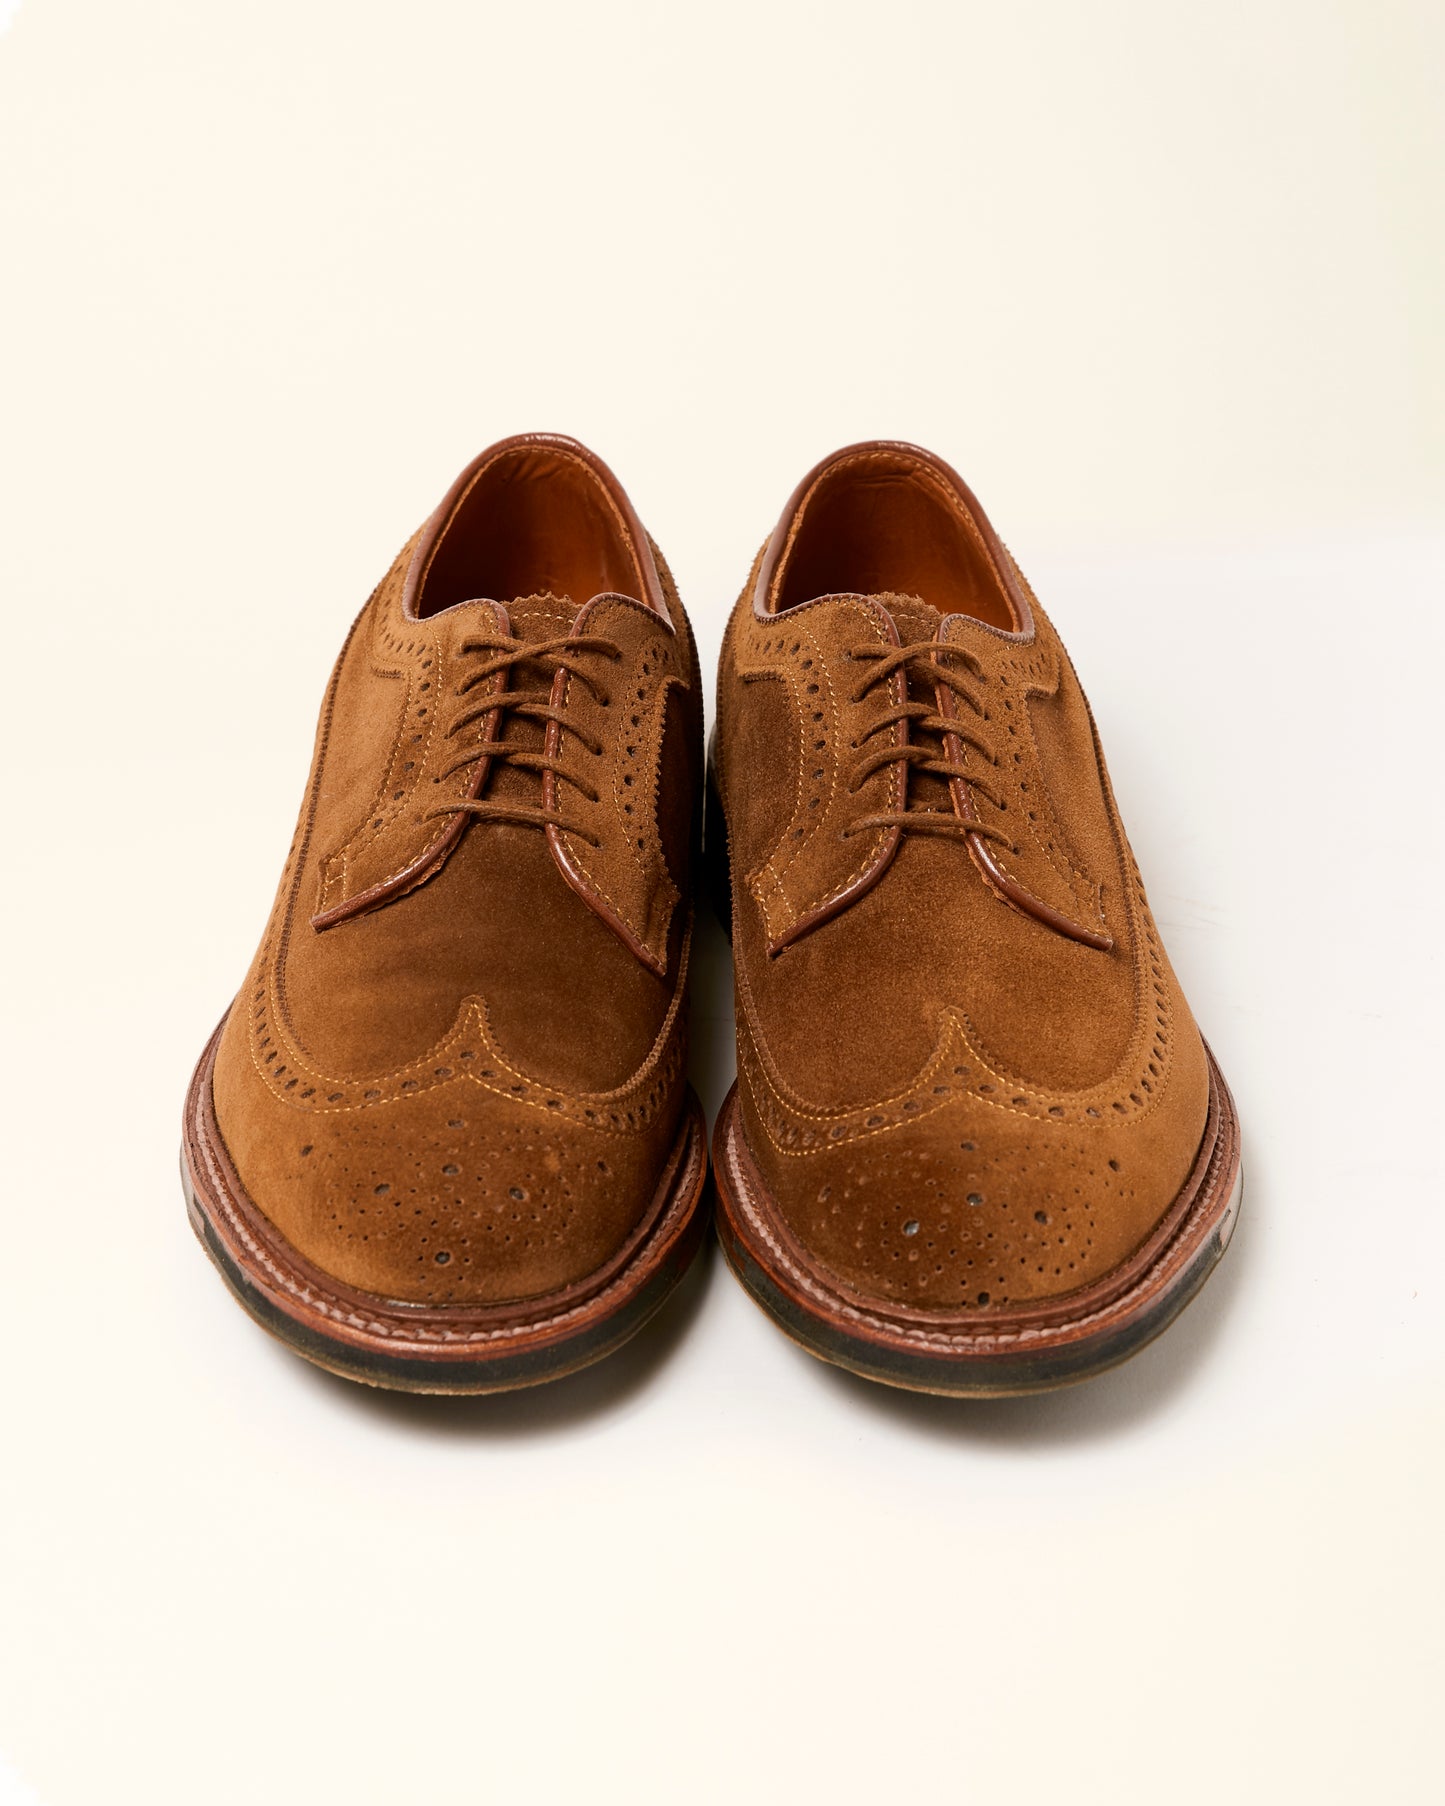 "Pike" Long Wing Blucher in Snuff Suede, Barrie Last